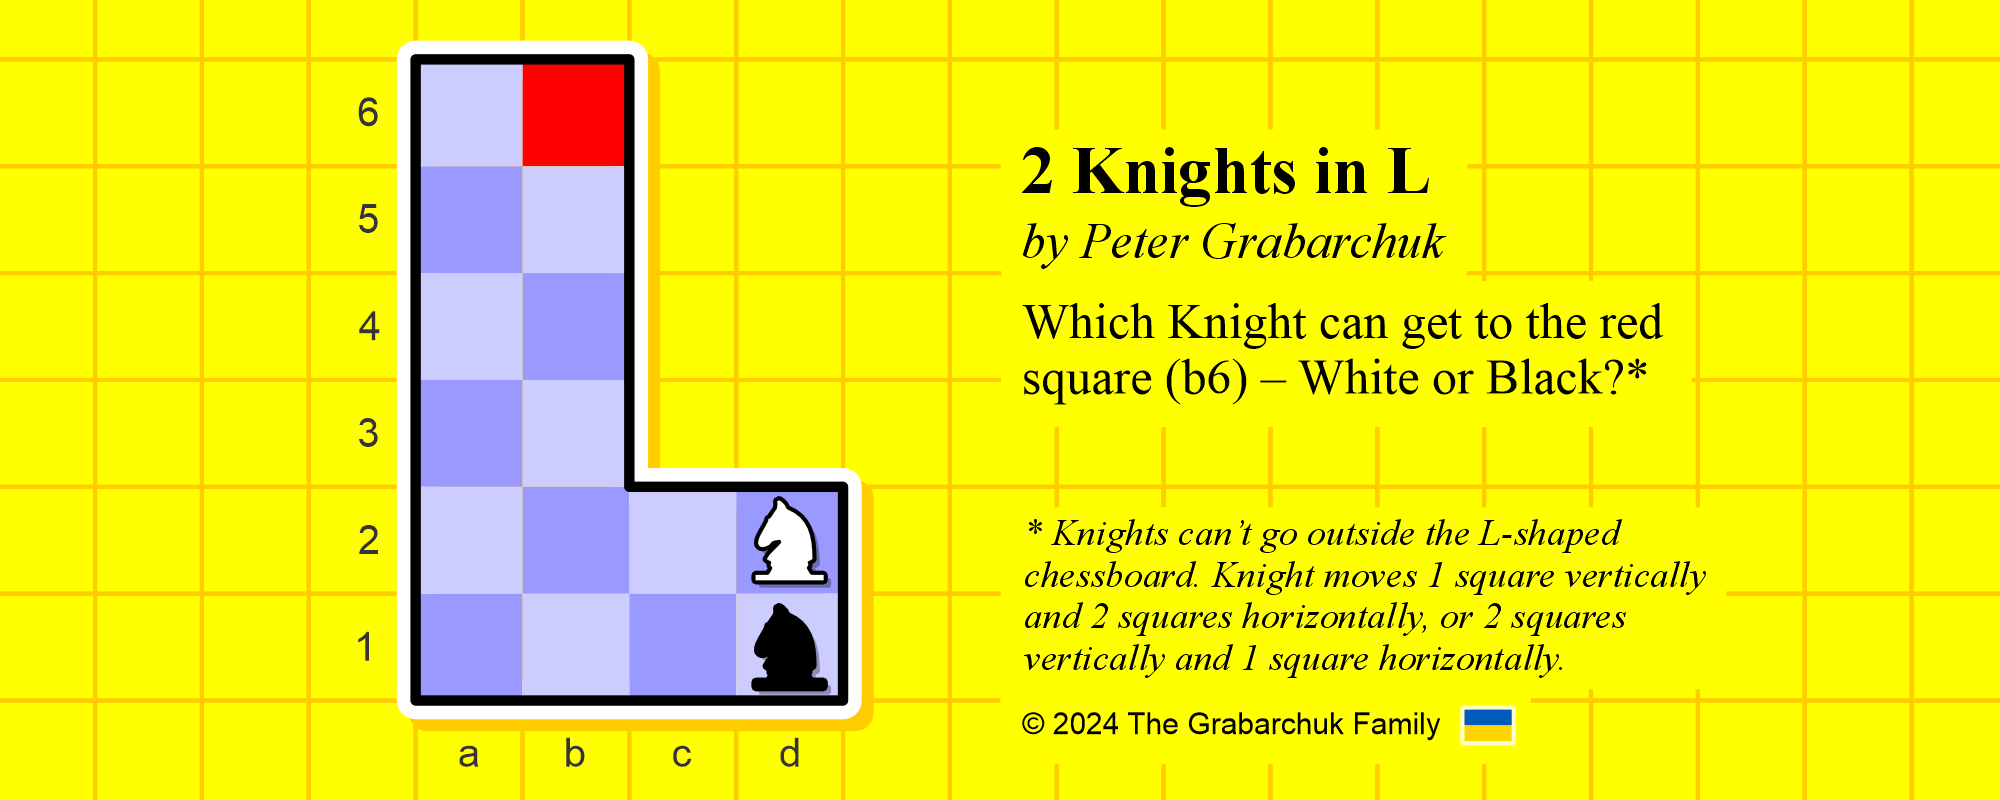 2 Knights In L by Peter Grabarchuk